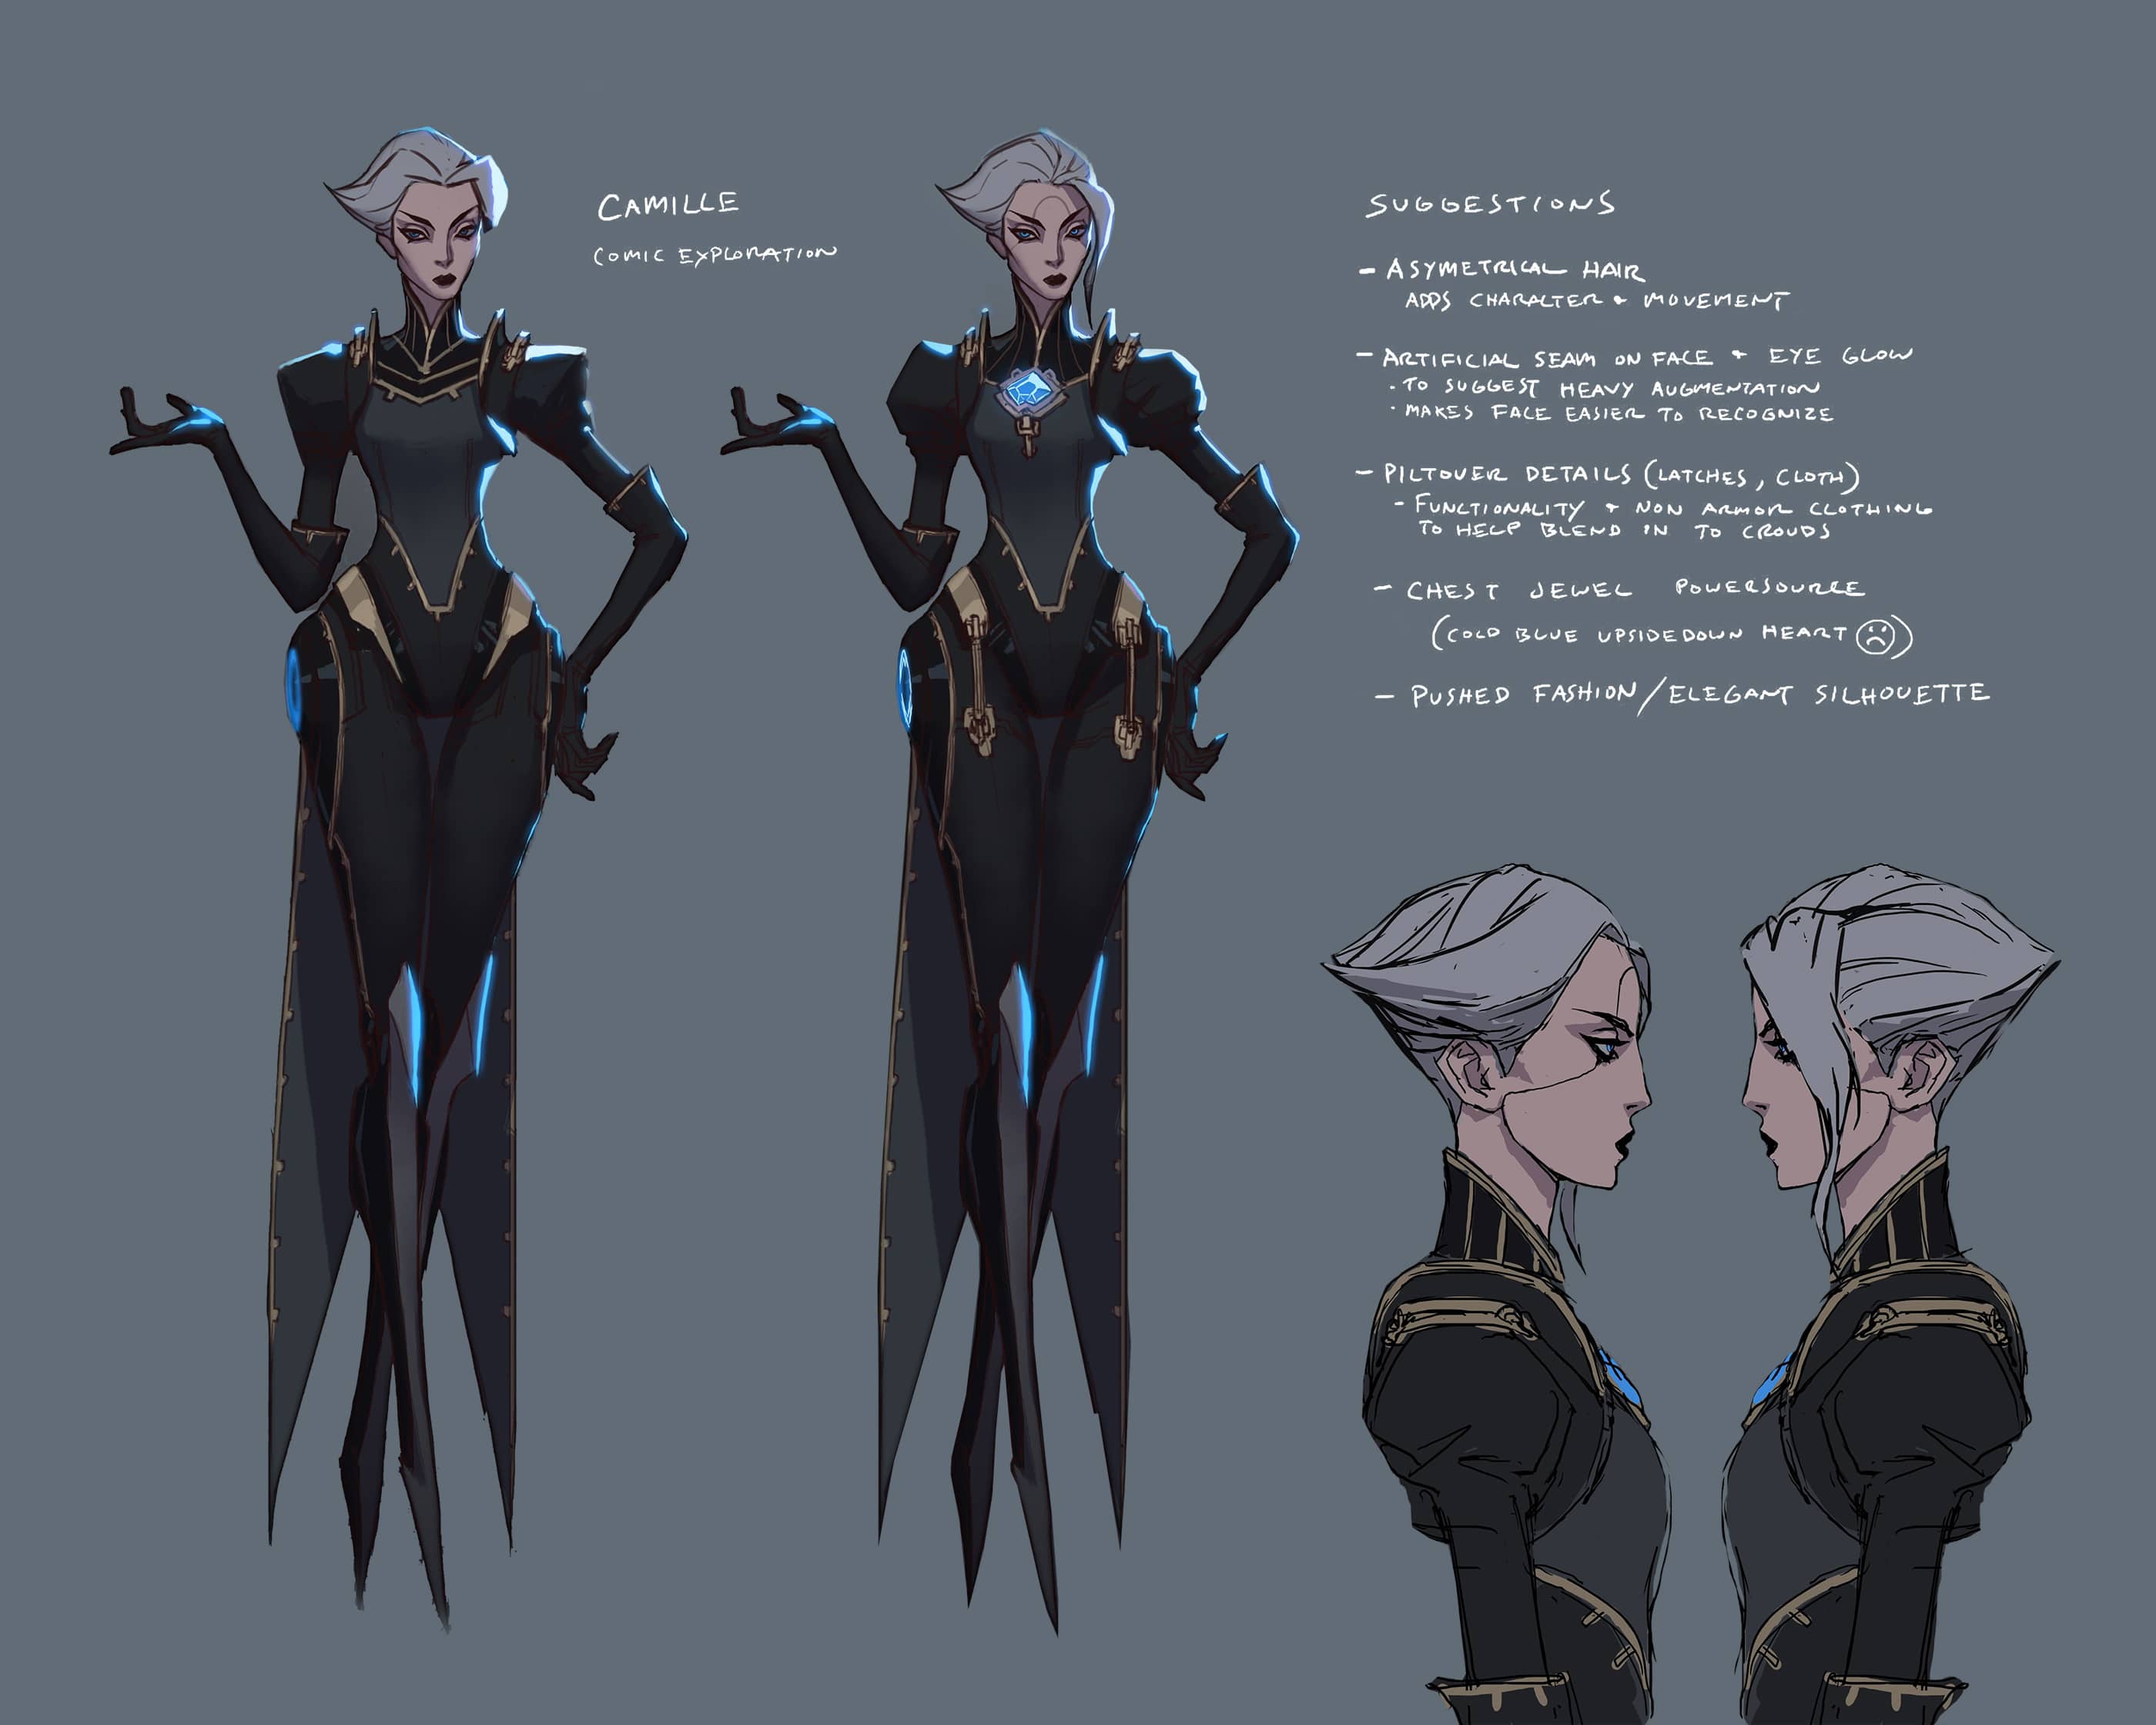 Early exploration of Camille for the Severed Ties comic. Source: http://na.leagueoflegends.com/en/featured/camille-comic